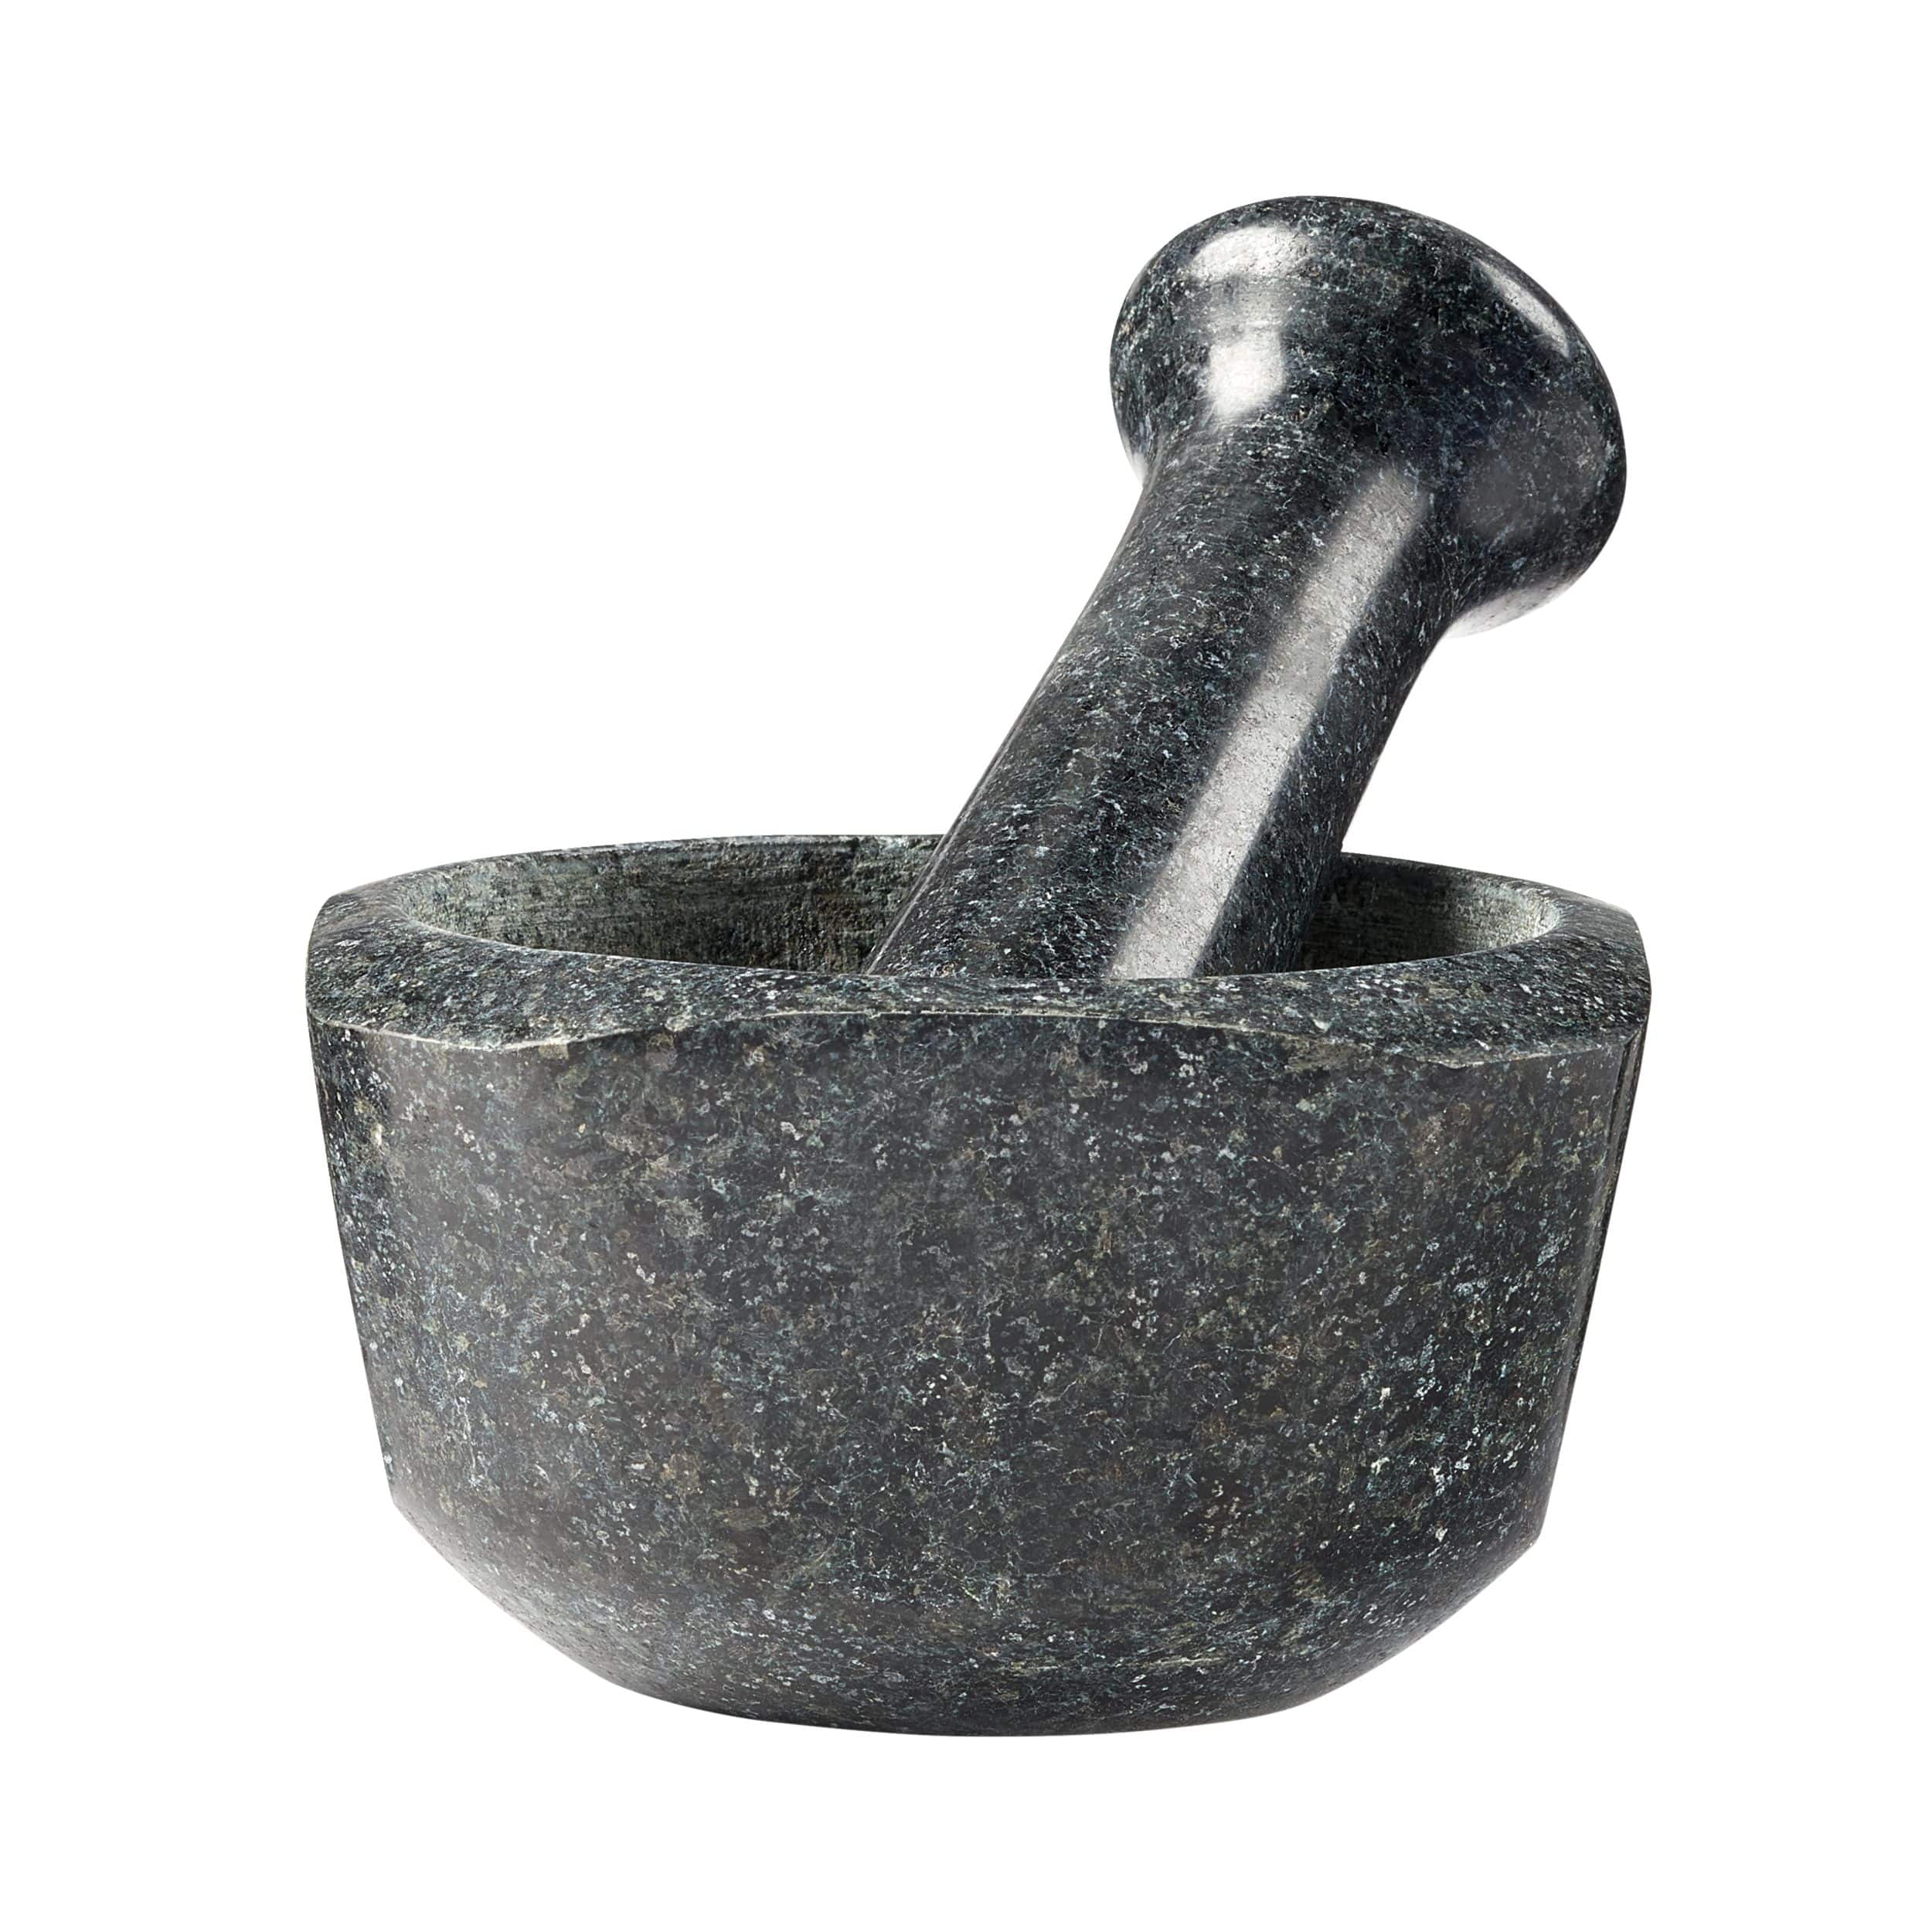 https://media-www.canadiantire.ca/product/living/kitchen/dining-and-entertaining/1425857/paderno-small-mortar-pestle-6b2e3fde-4849-437c-a597-2aa8699d1f89-jpgrendition.jpg